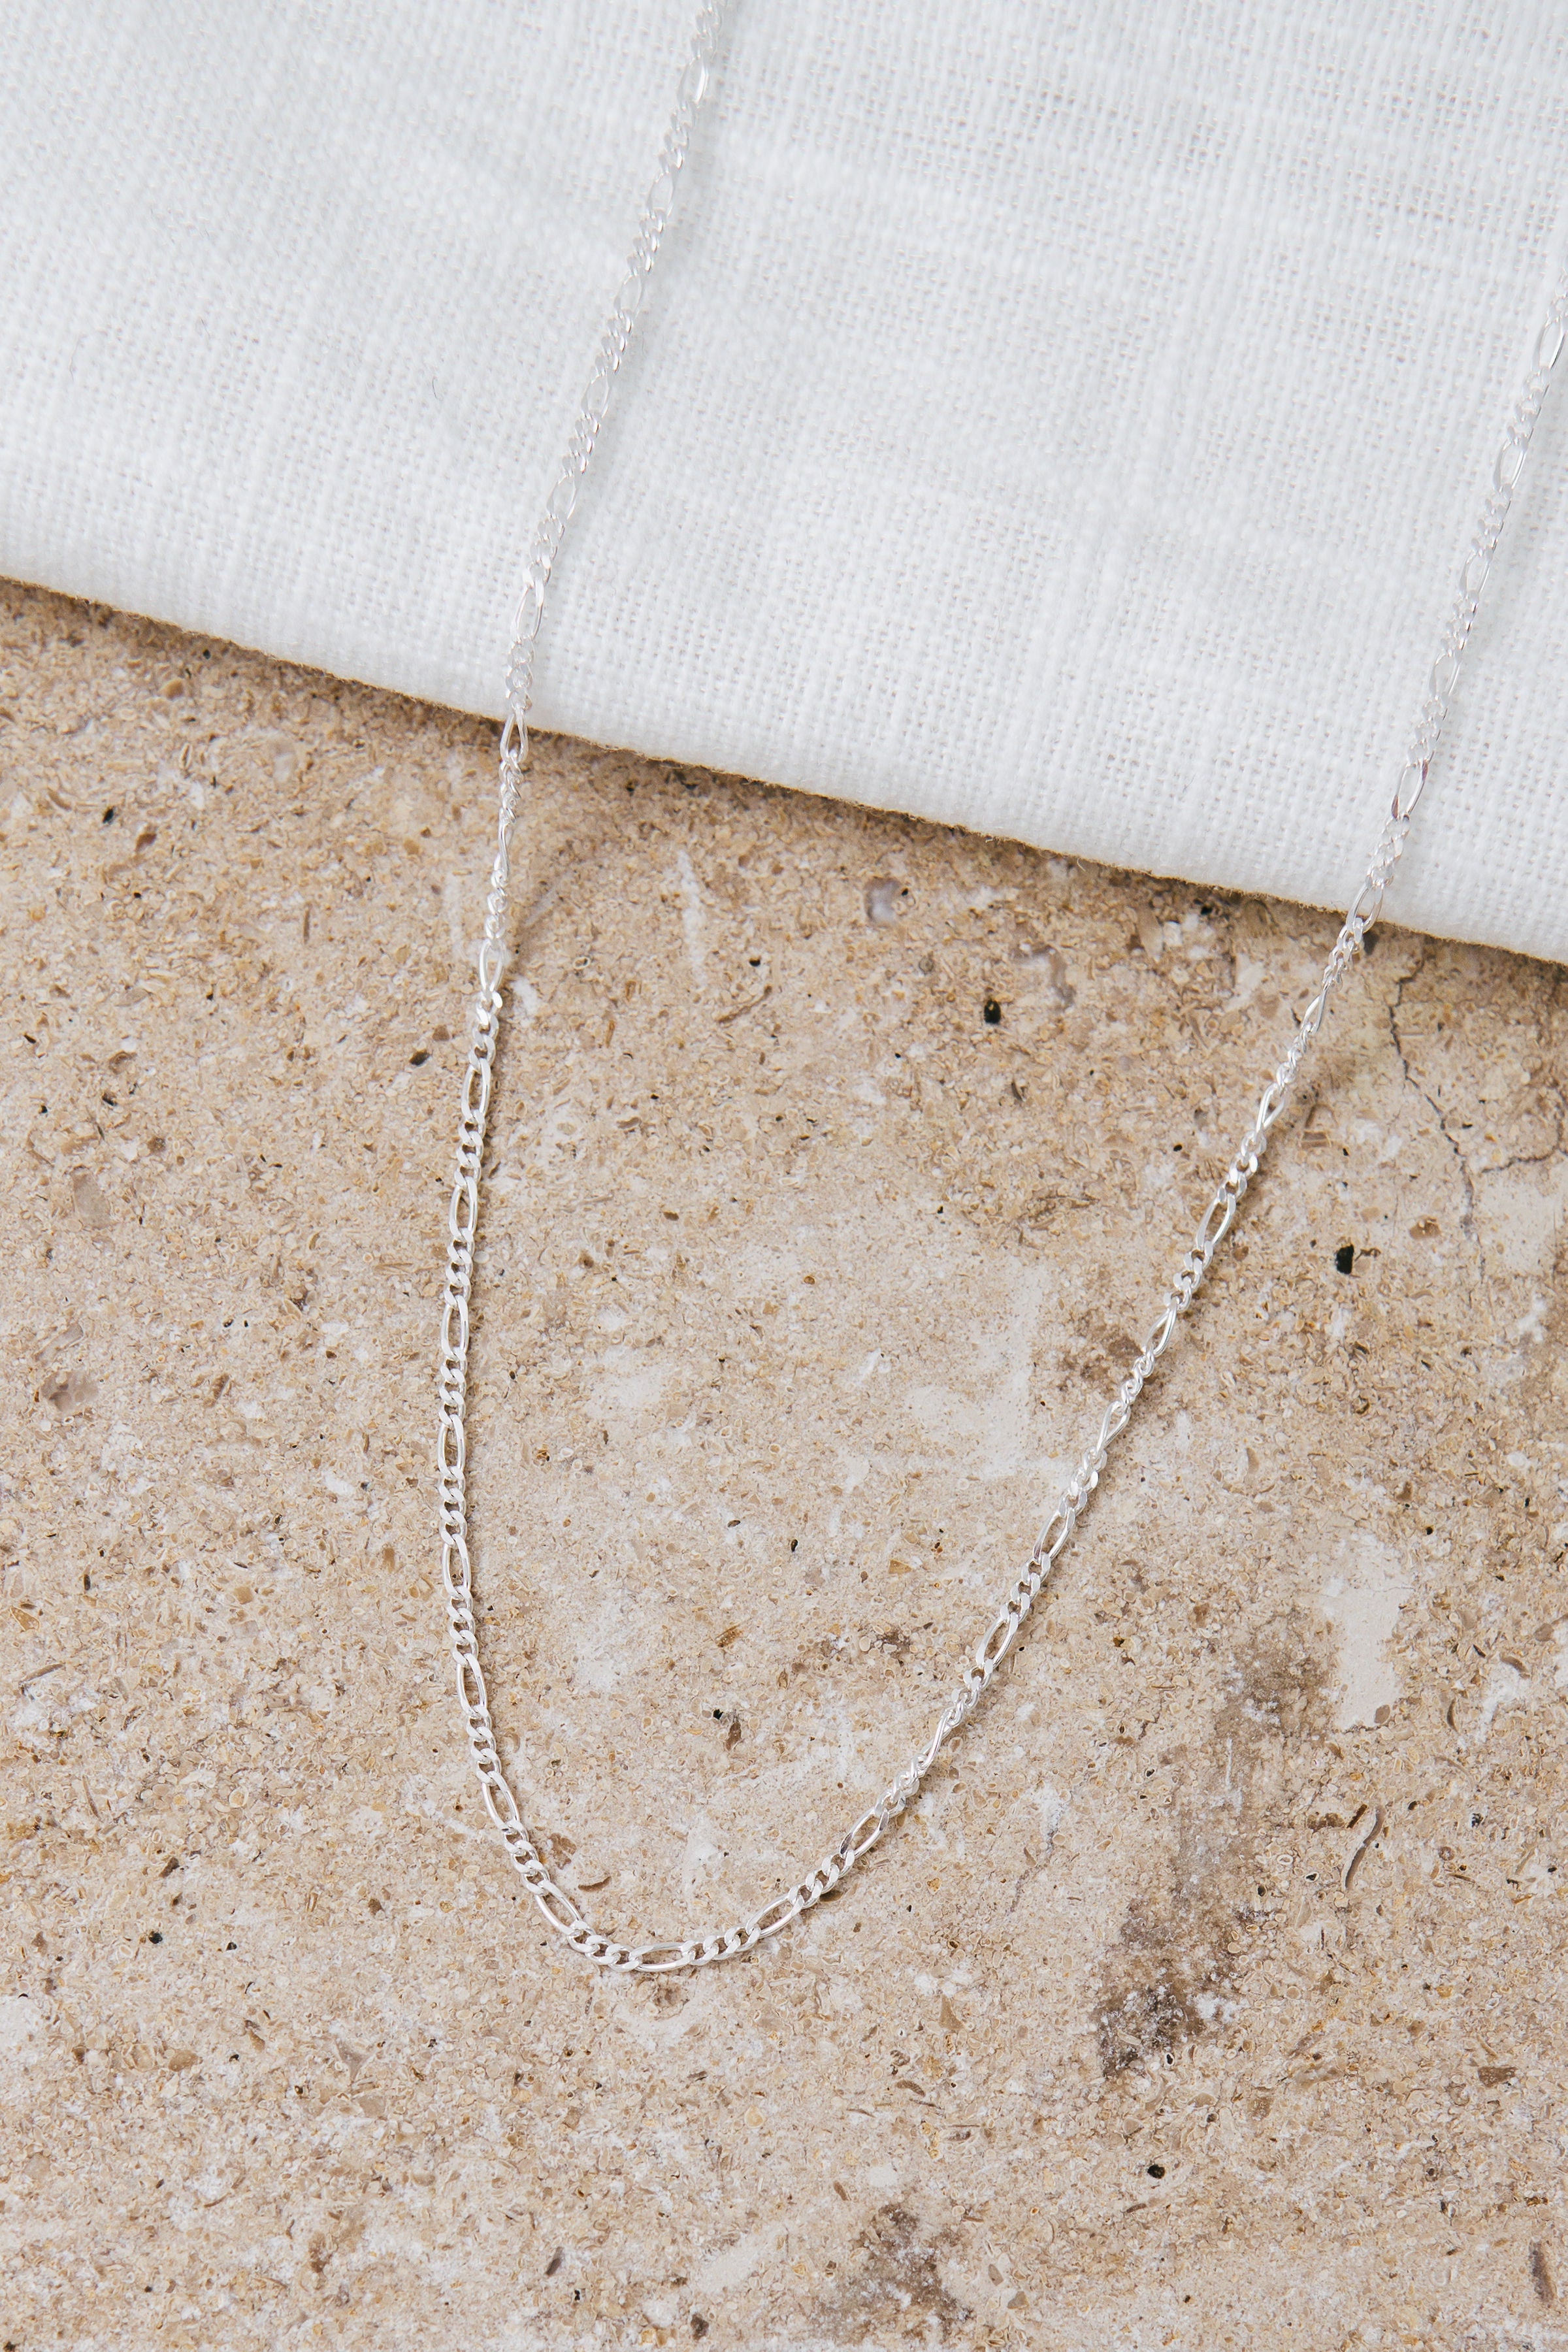 Delicate and Simple Silver Stacking Chains